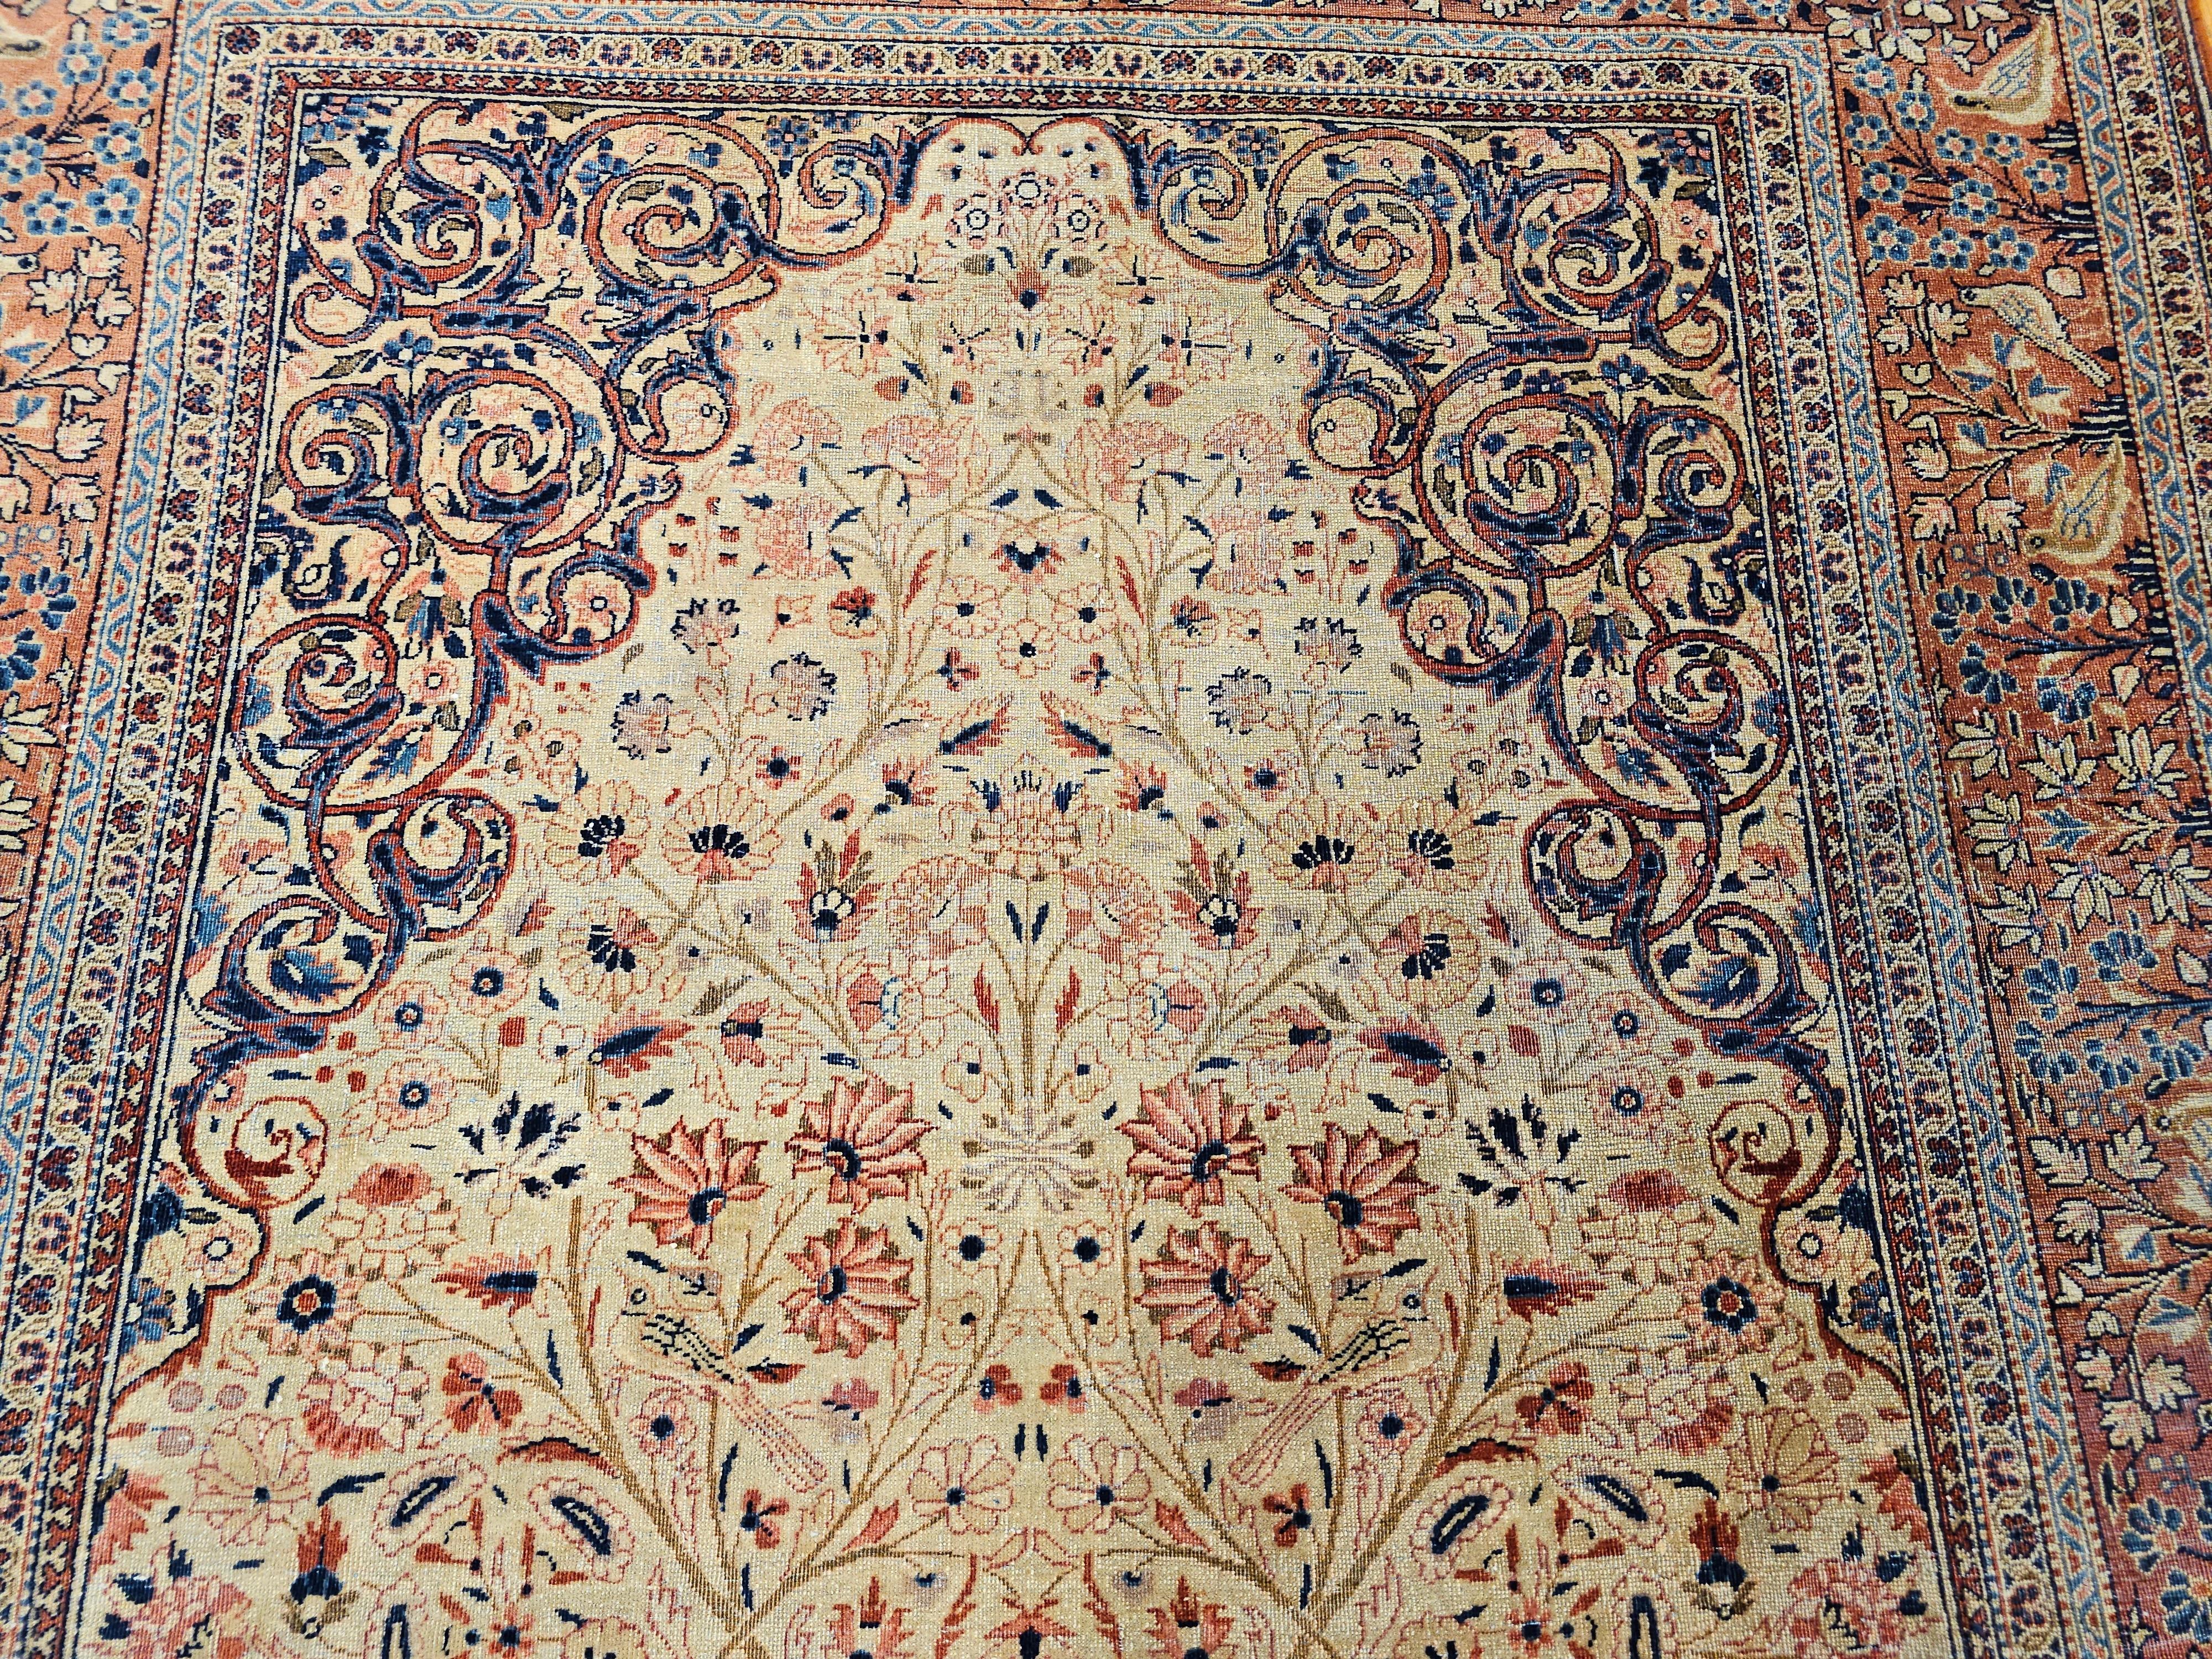 19th Century Persian Kashan Vase “Tree of Life” Rug in Ivory, Brick Red, Navy For Sale 8